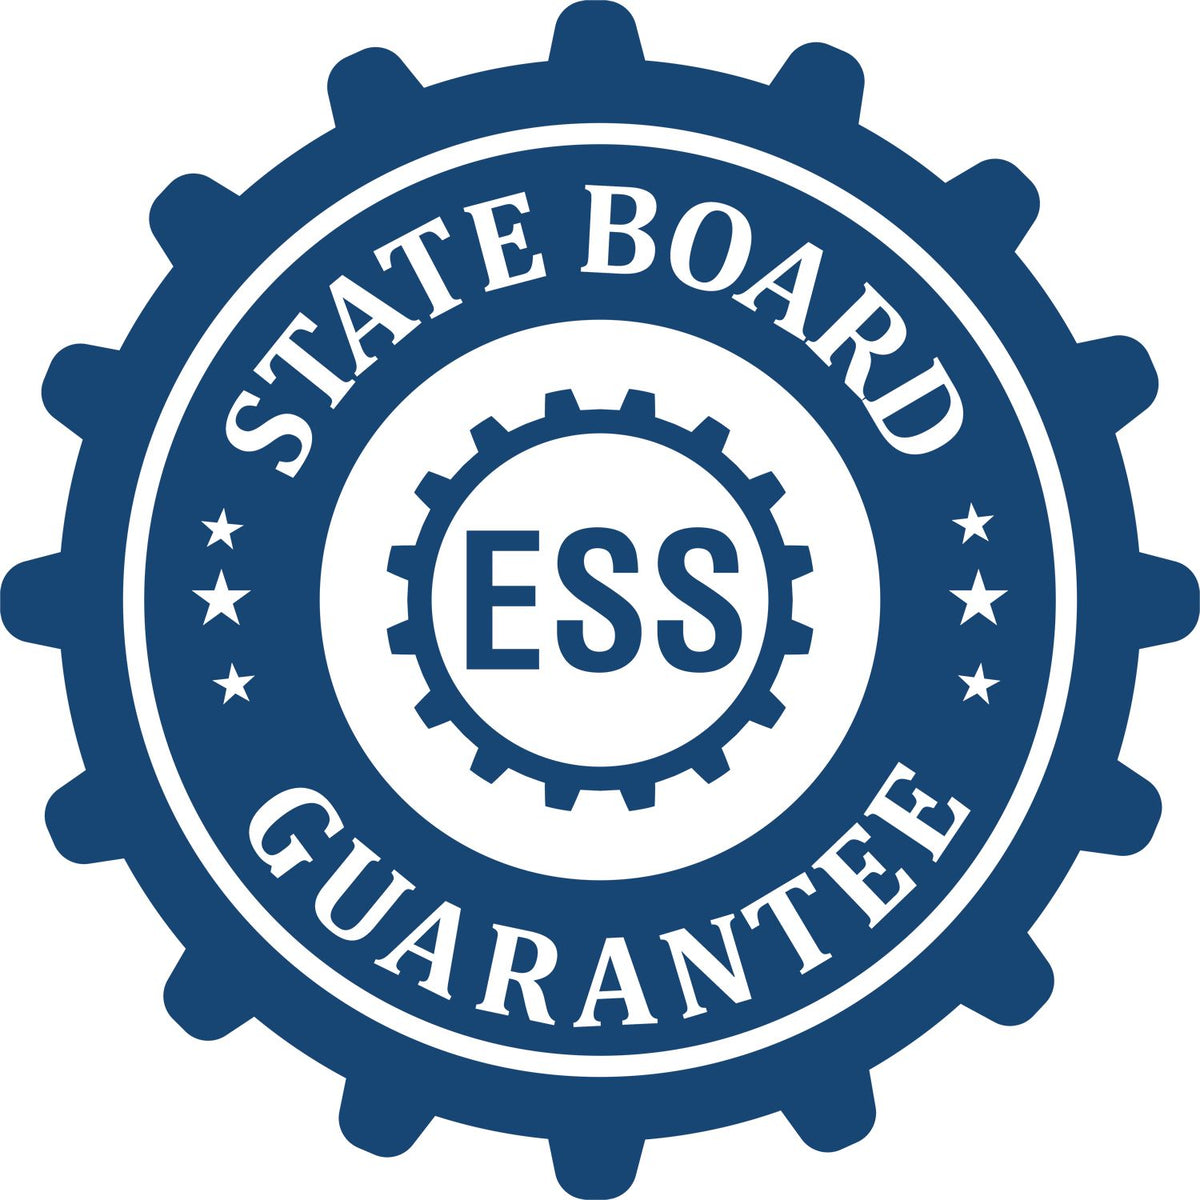 An emblem in a gear shape illustrating a state board guarantee for the State of Nevada Extended Long Reach Engineer Seal product.